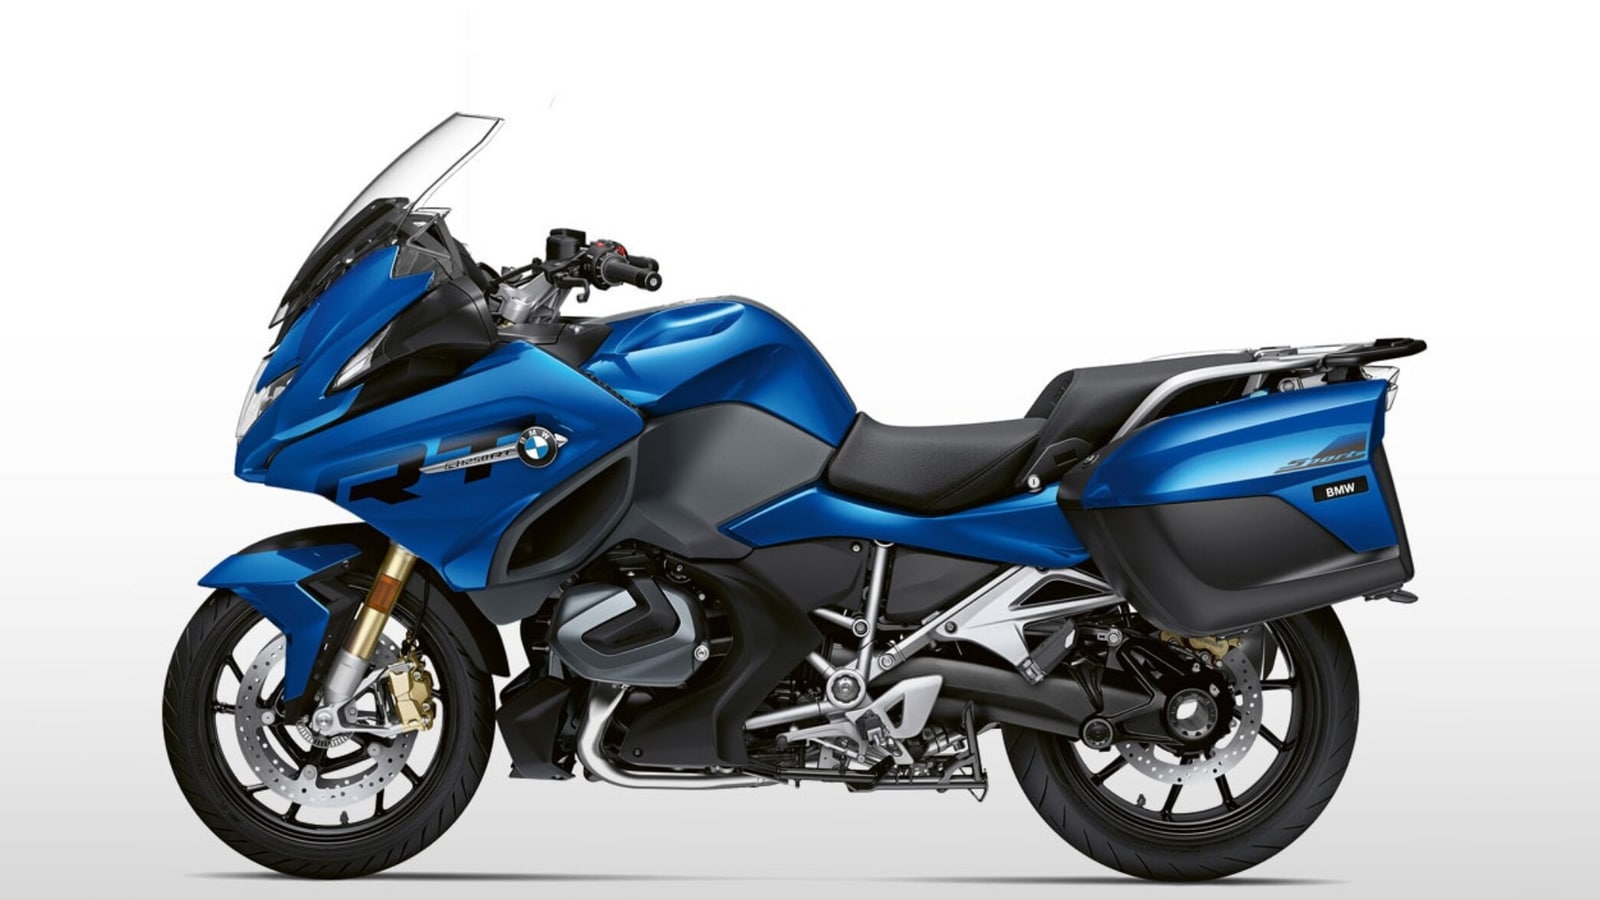 BMW Motorrad recalls R 1250 RT & K 1600 motorcycles in this country. Here's why